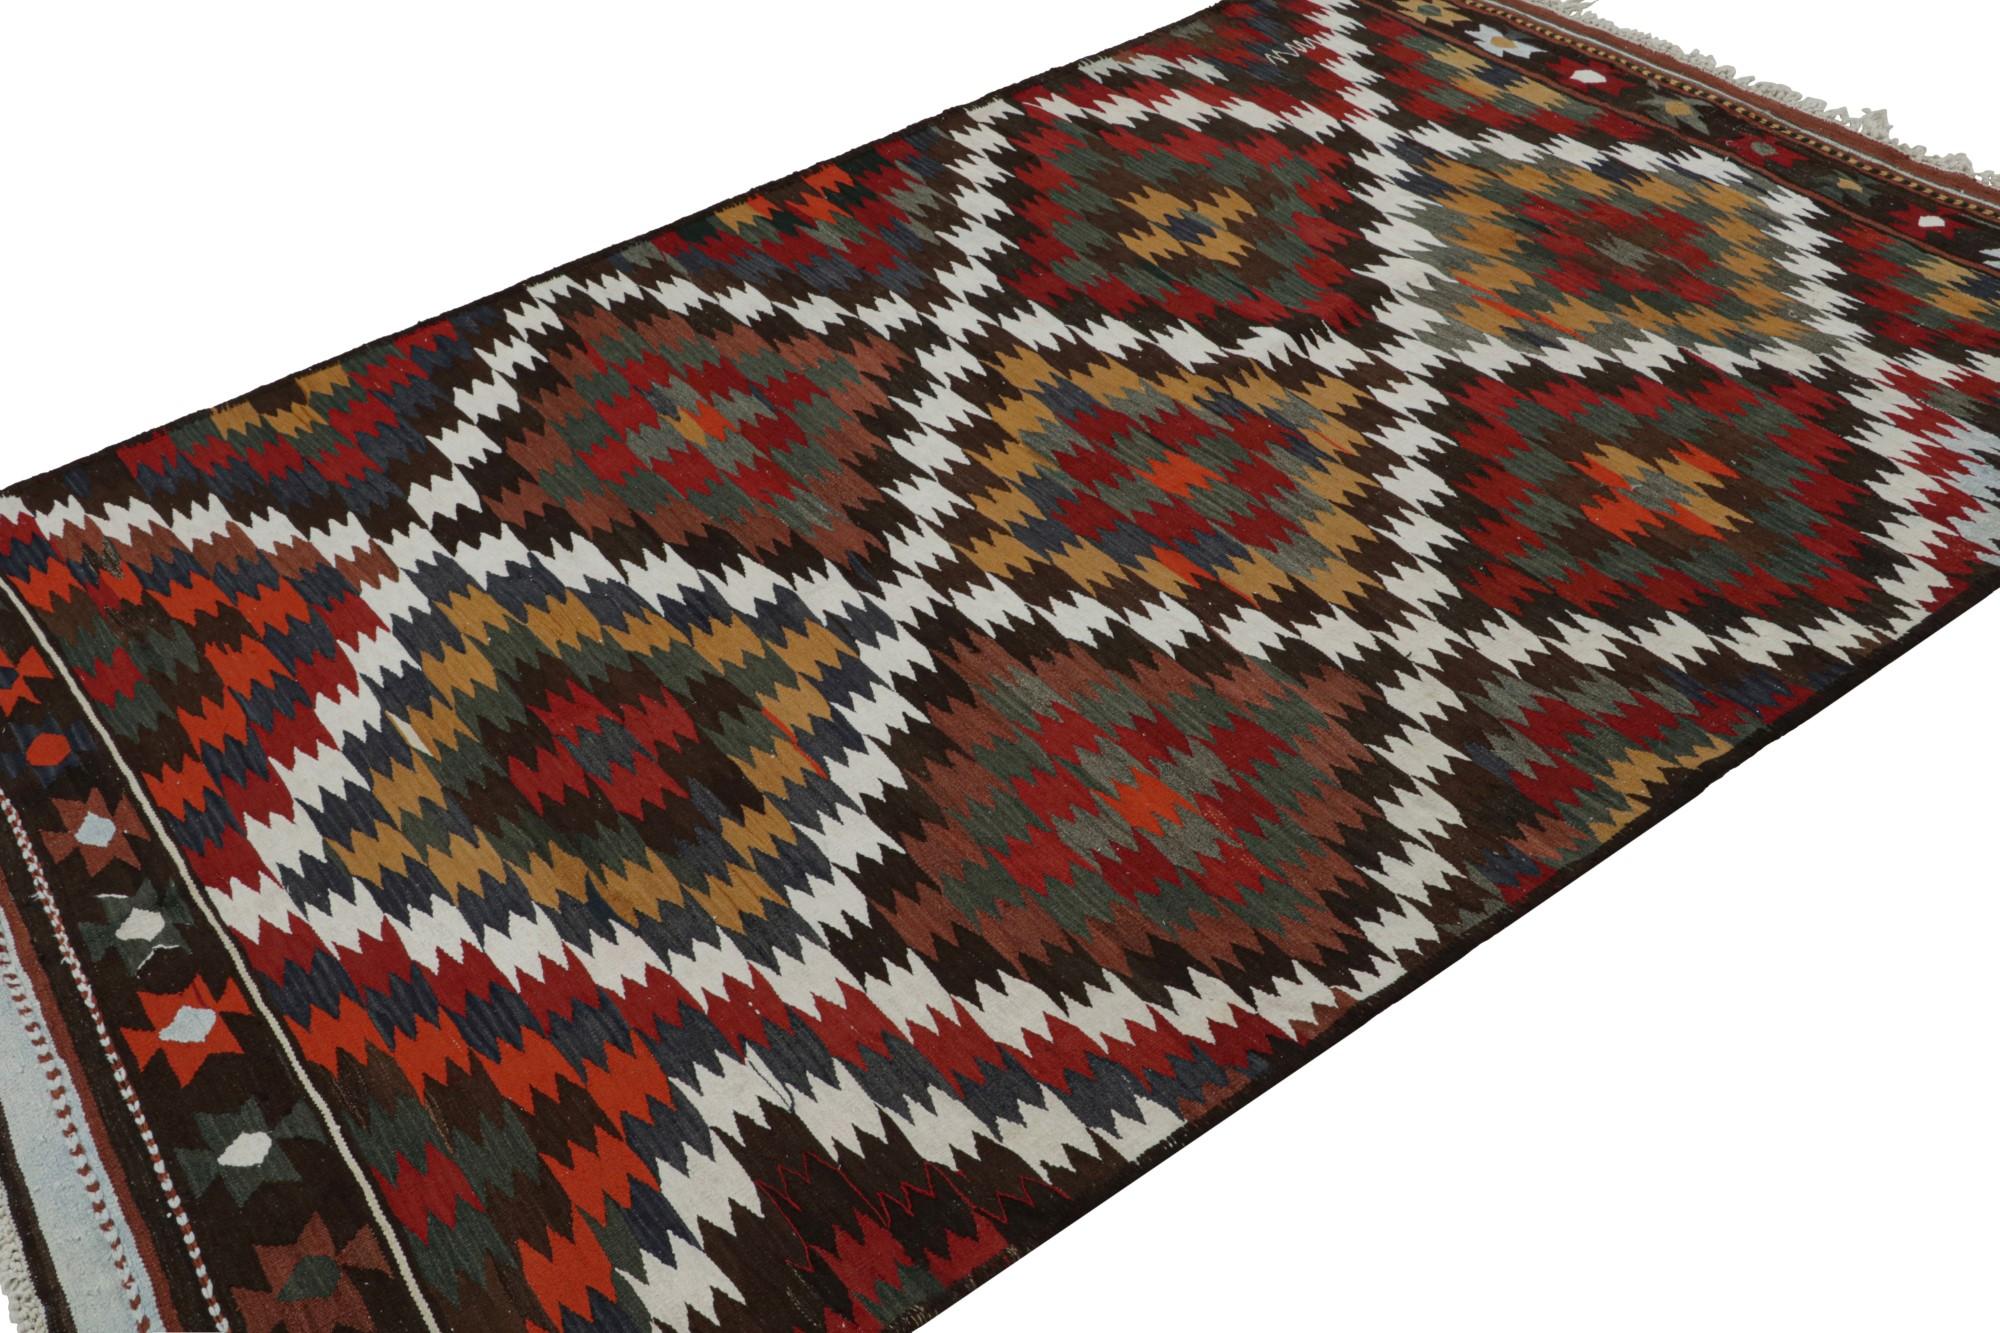 Hand knotted in wool, this 6x9 vintage Afghan tribal kilim rug with its all over geometric patterns, is an extraordinarily addition to the Rug & Kilim Collection. 

On the Design: 

Keen eyes will further admire the finely woven large-scale diamond